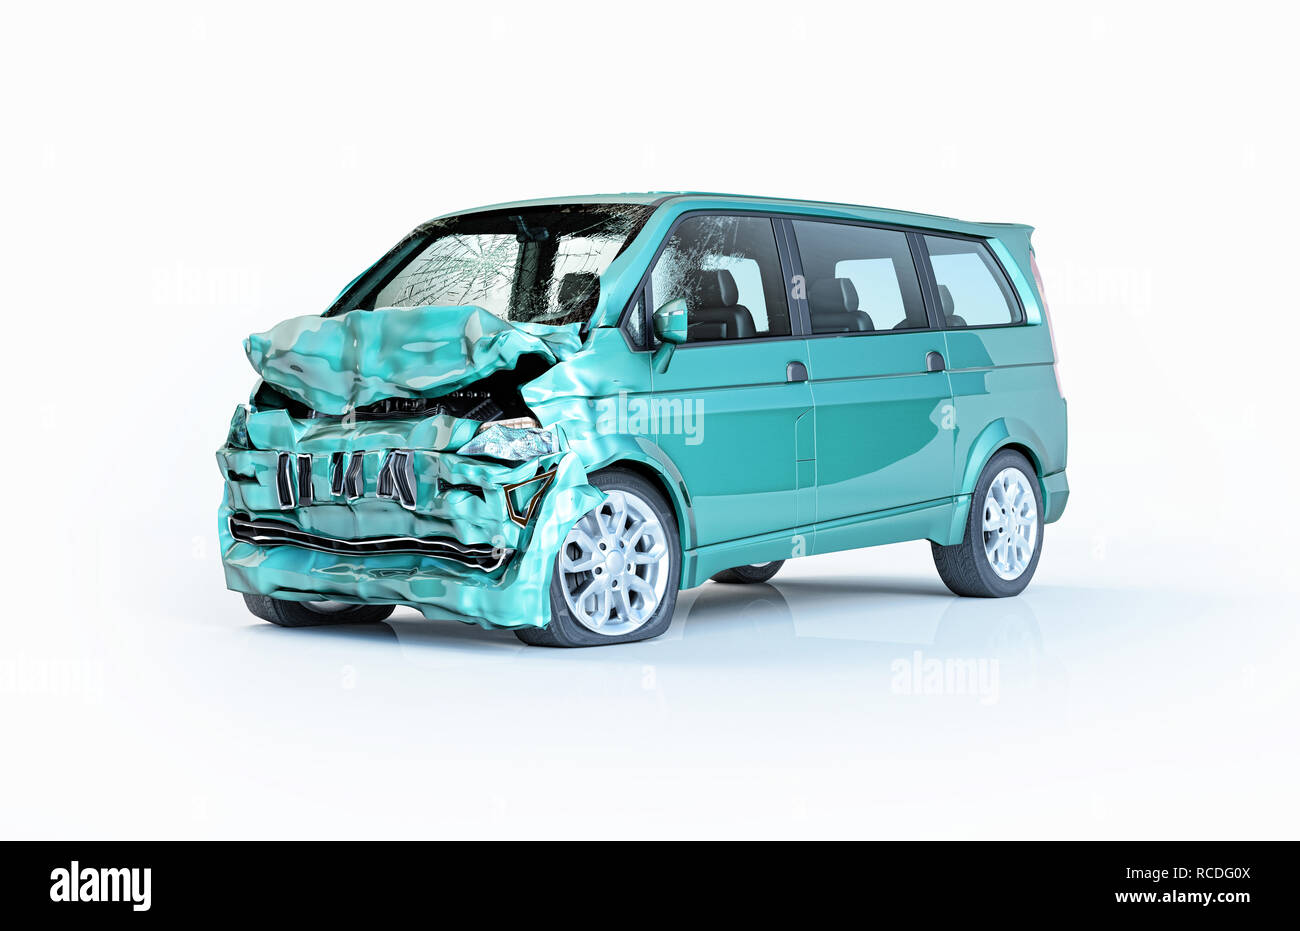 Single car accident. Green van heavily damaged on the front part. Isolated on white background. Perspective view. Stock Photo